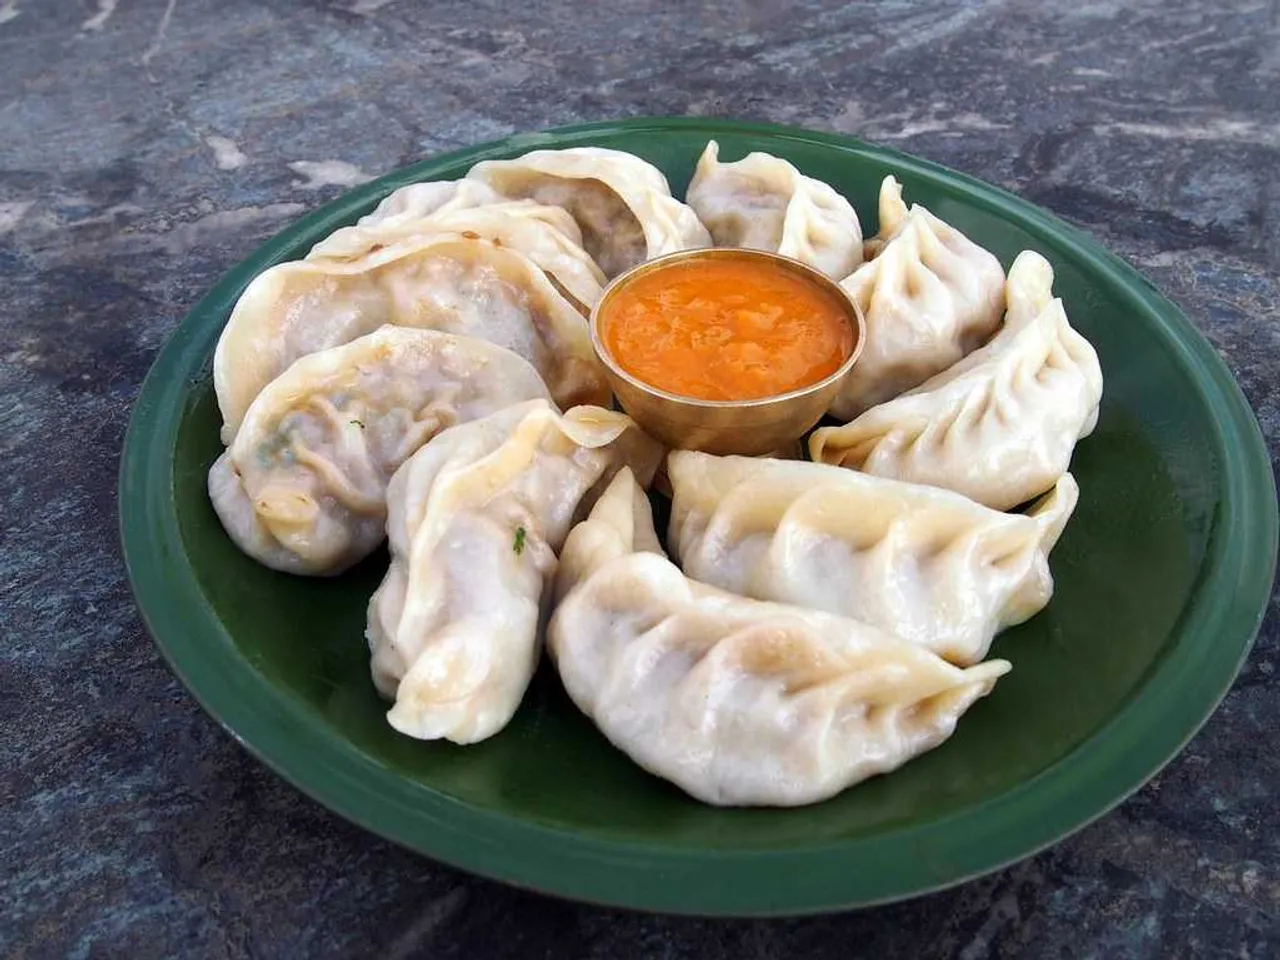 Visit these Places to get the Best Momos in Delhi